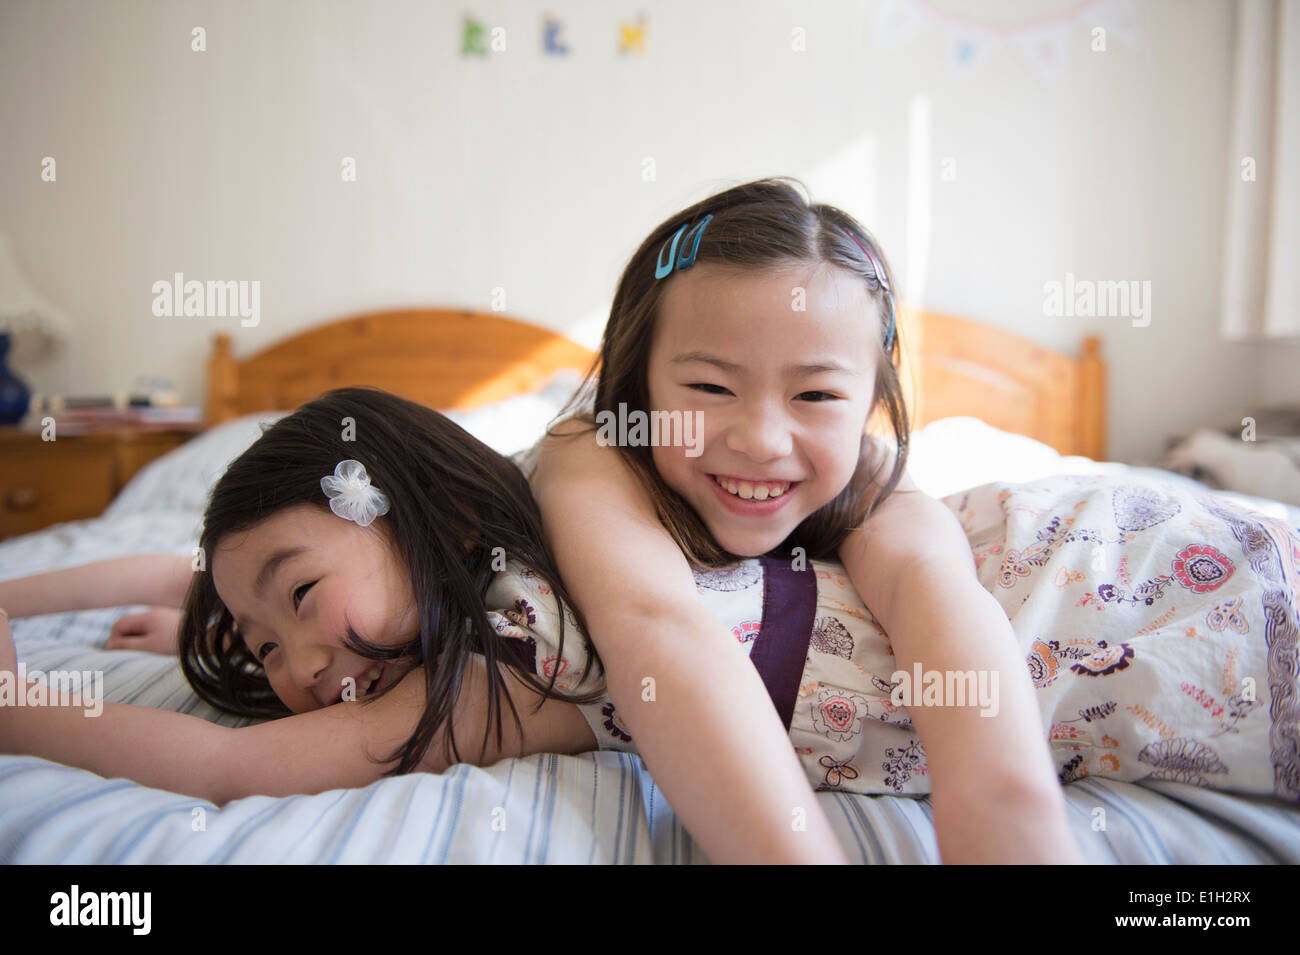 Two young female friends lying on bed Stock Photo